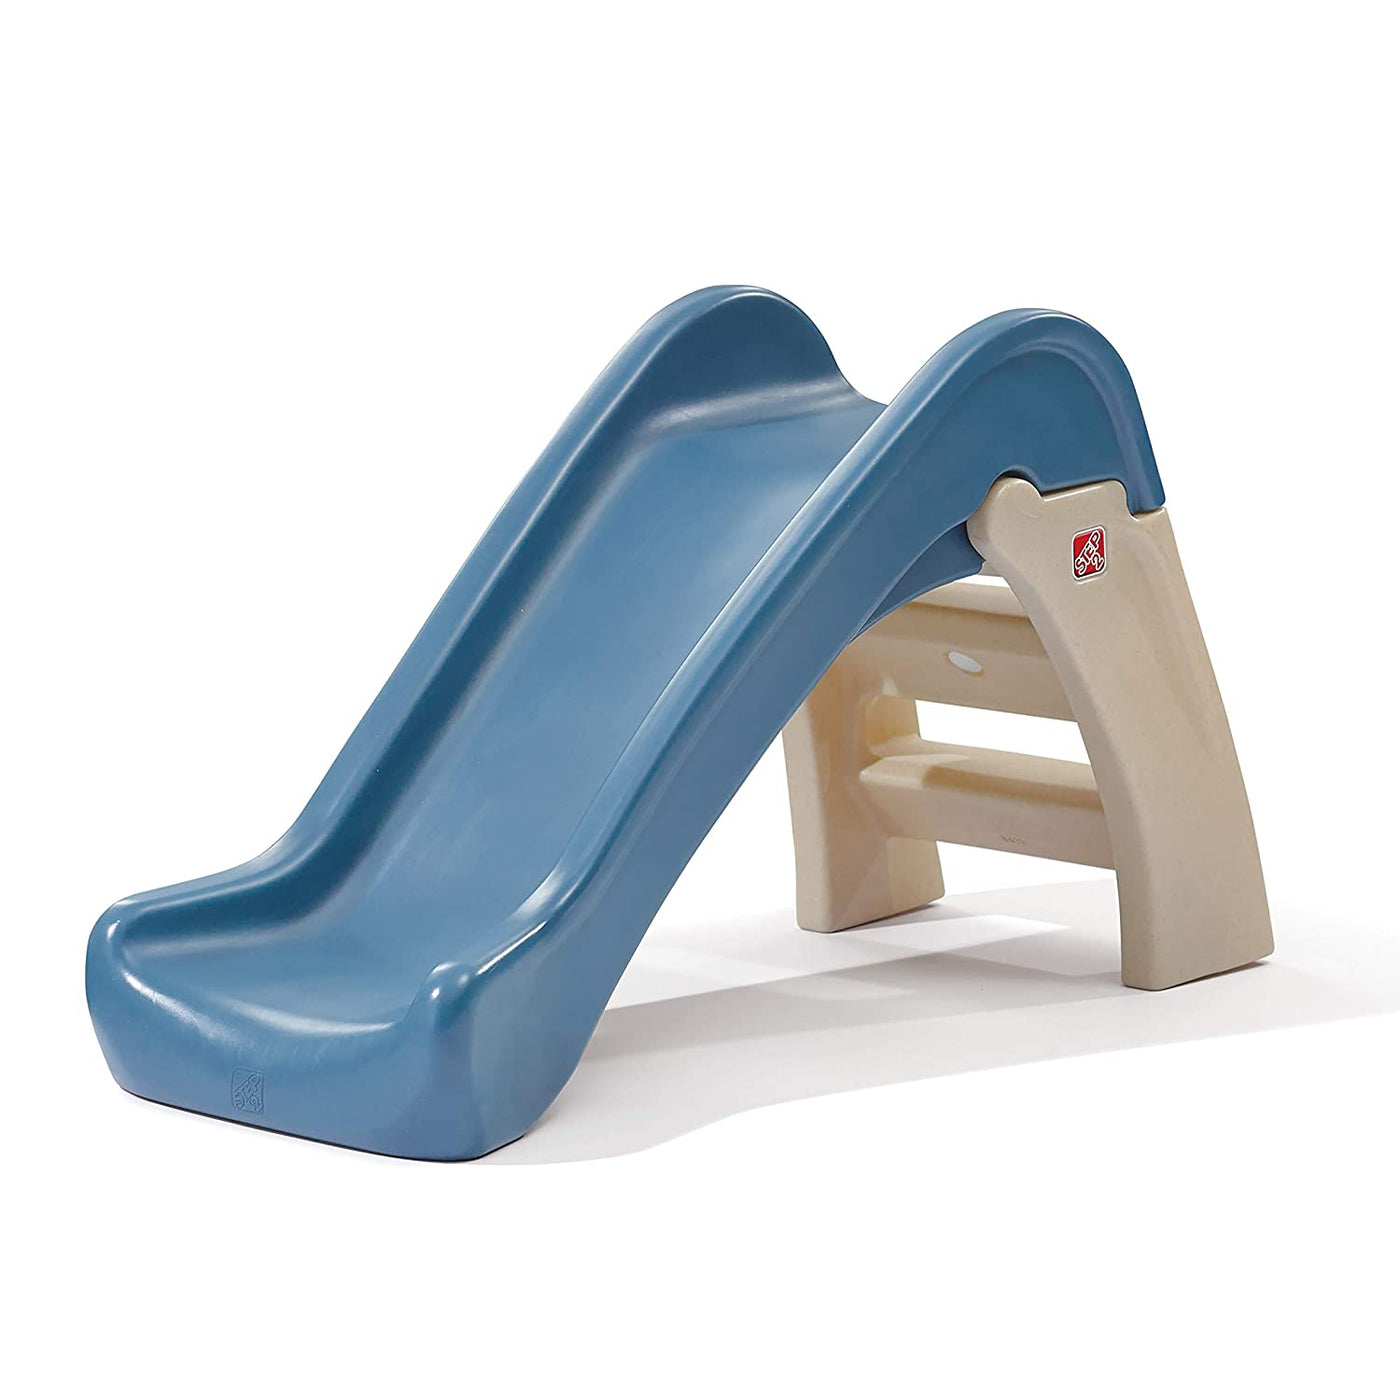 Play and Fold Jr. Slide | Step2